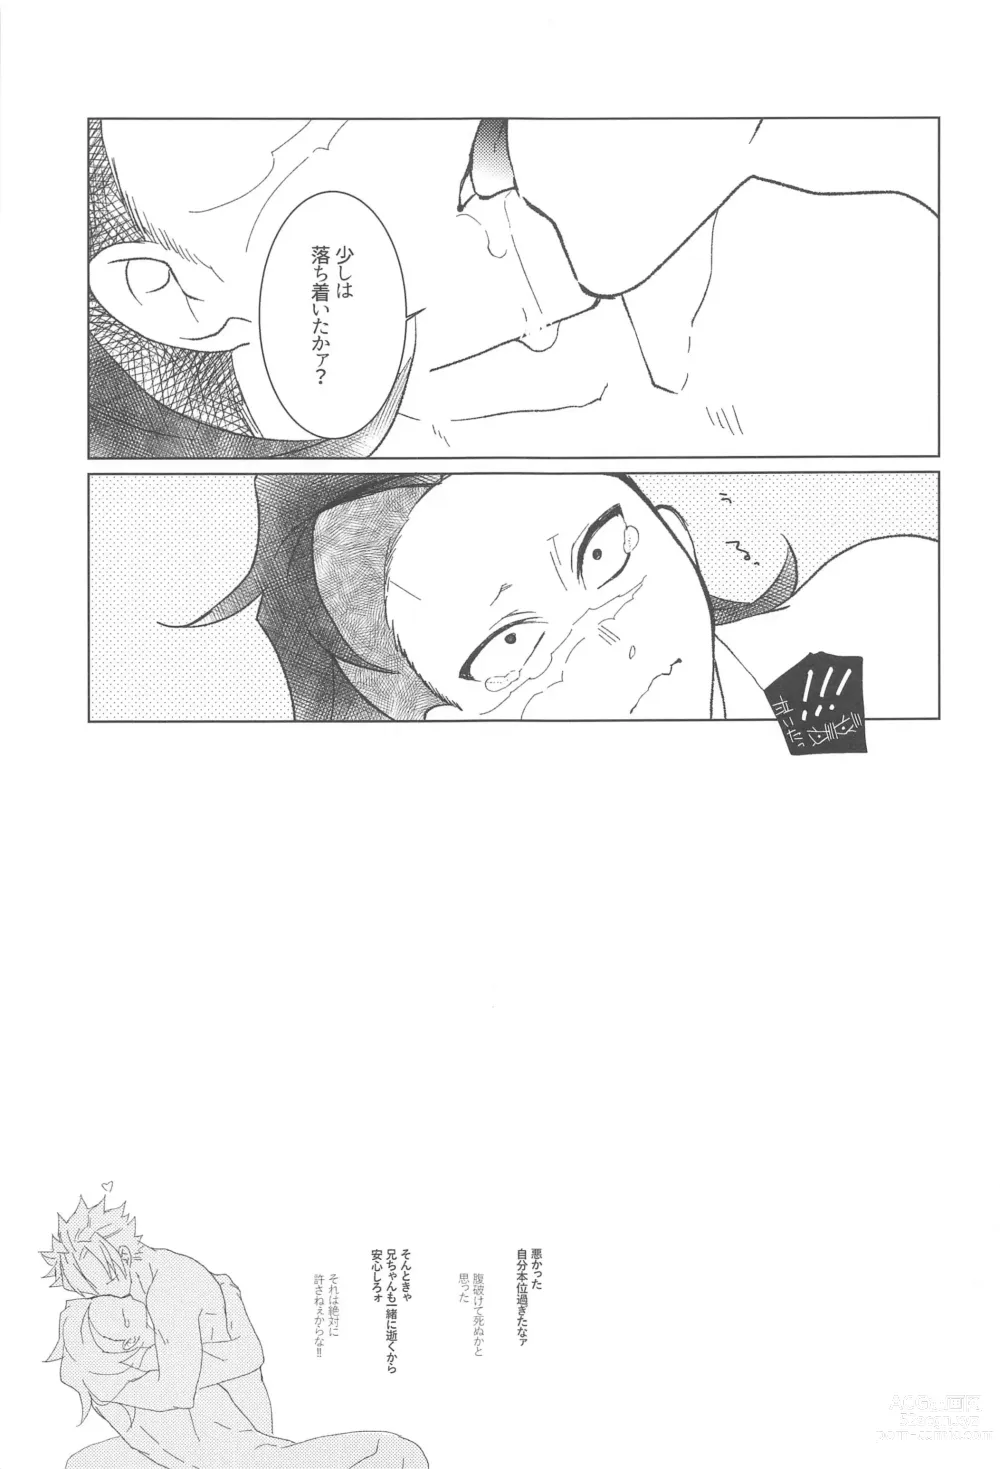 Page 20 of doujinshi love me again and again